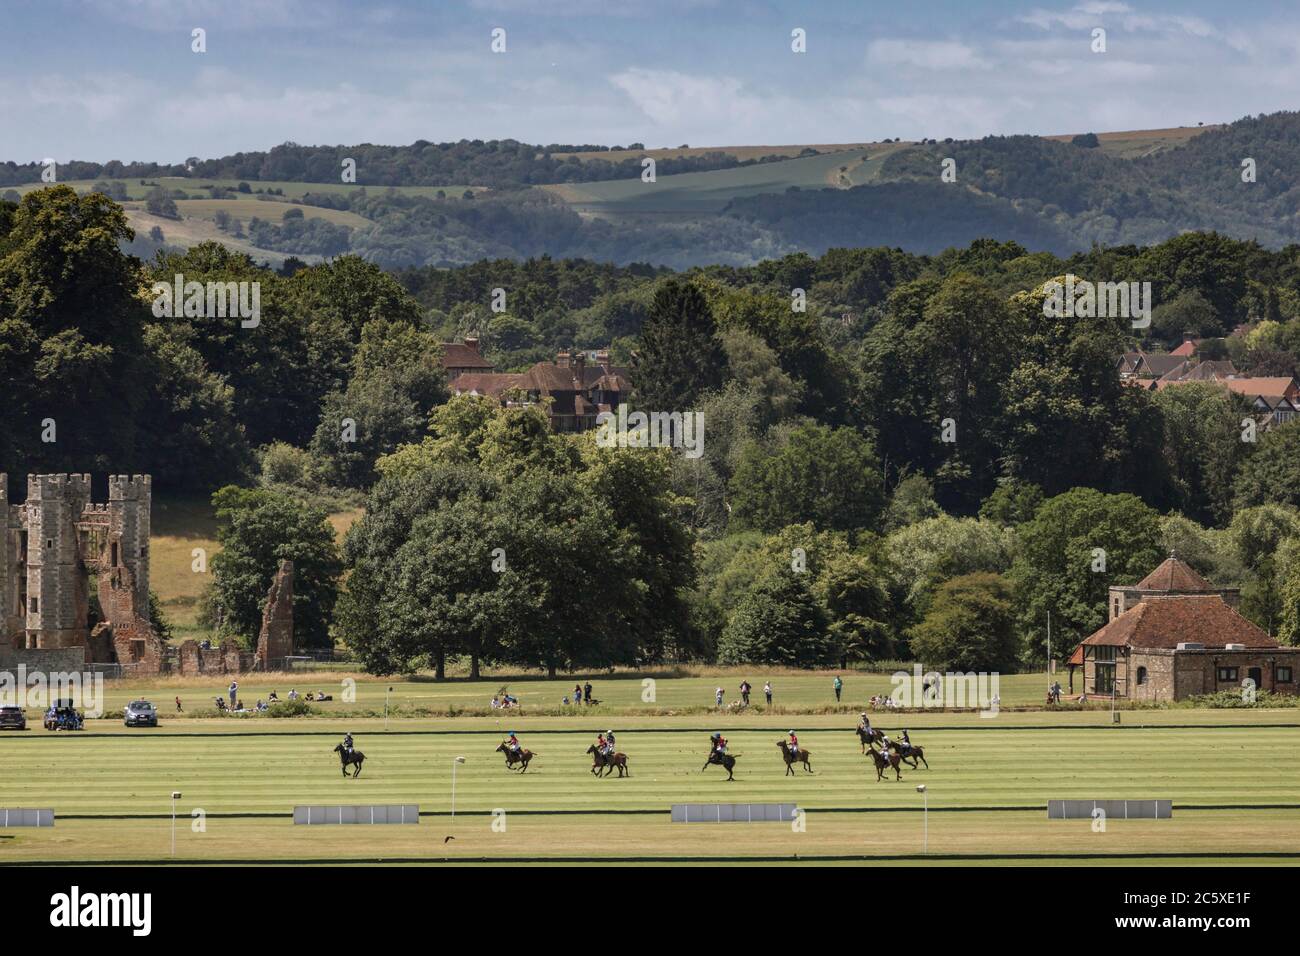 Les Lions play Scone (wearing red) at Cowdray Park Polo Club in Midhurst, Sussex in the early stages of the prestigious Gold Cup tournament. The polo Stock Photo